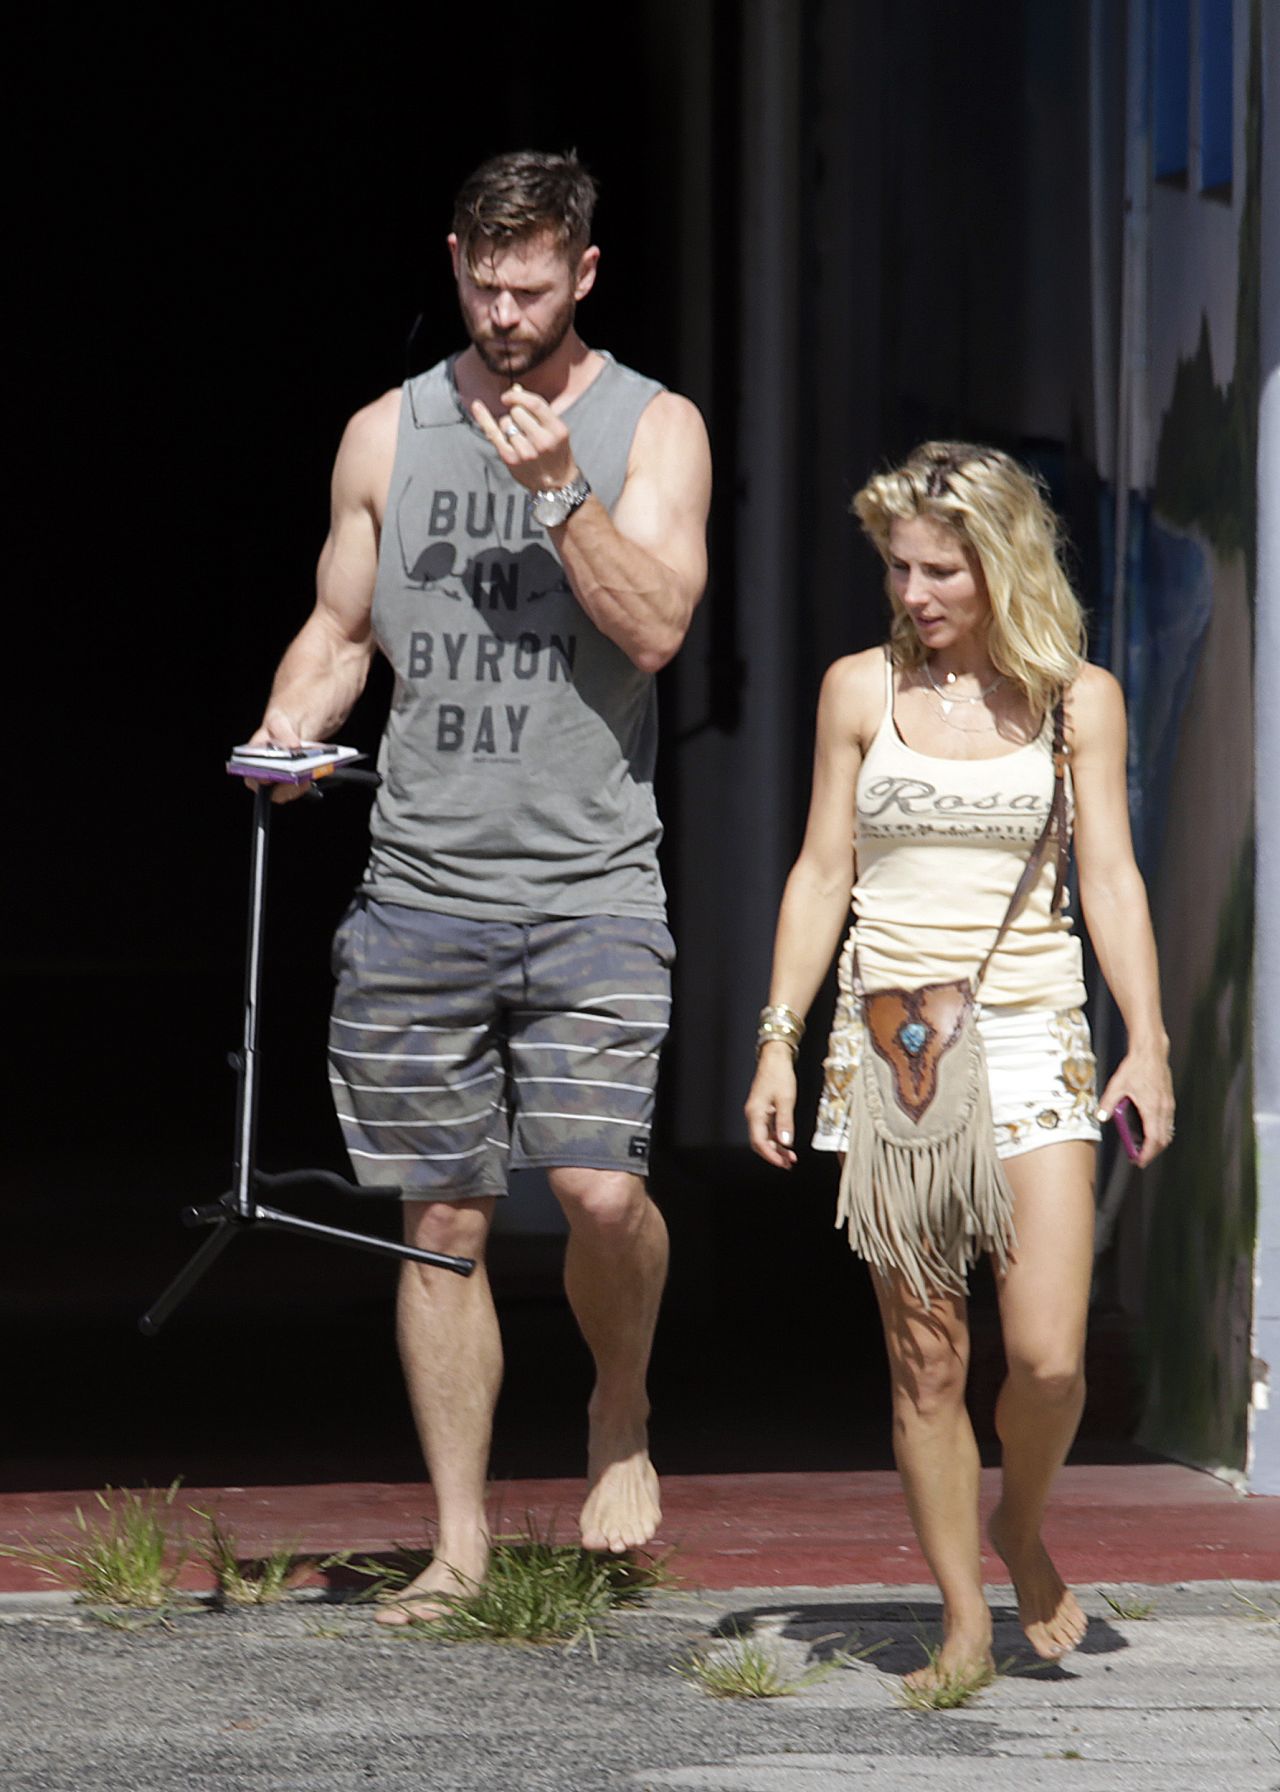 elsa-pataky-and-chris-hemsworth-out-in-byron-bay-02-06-2019-9.jpg